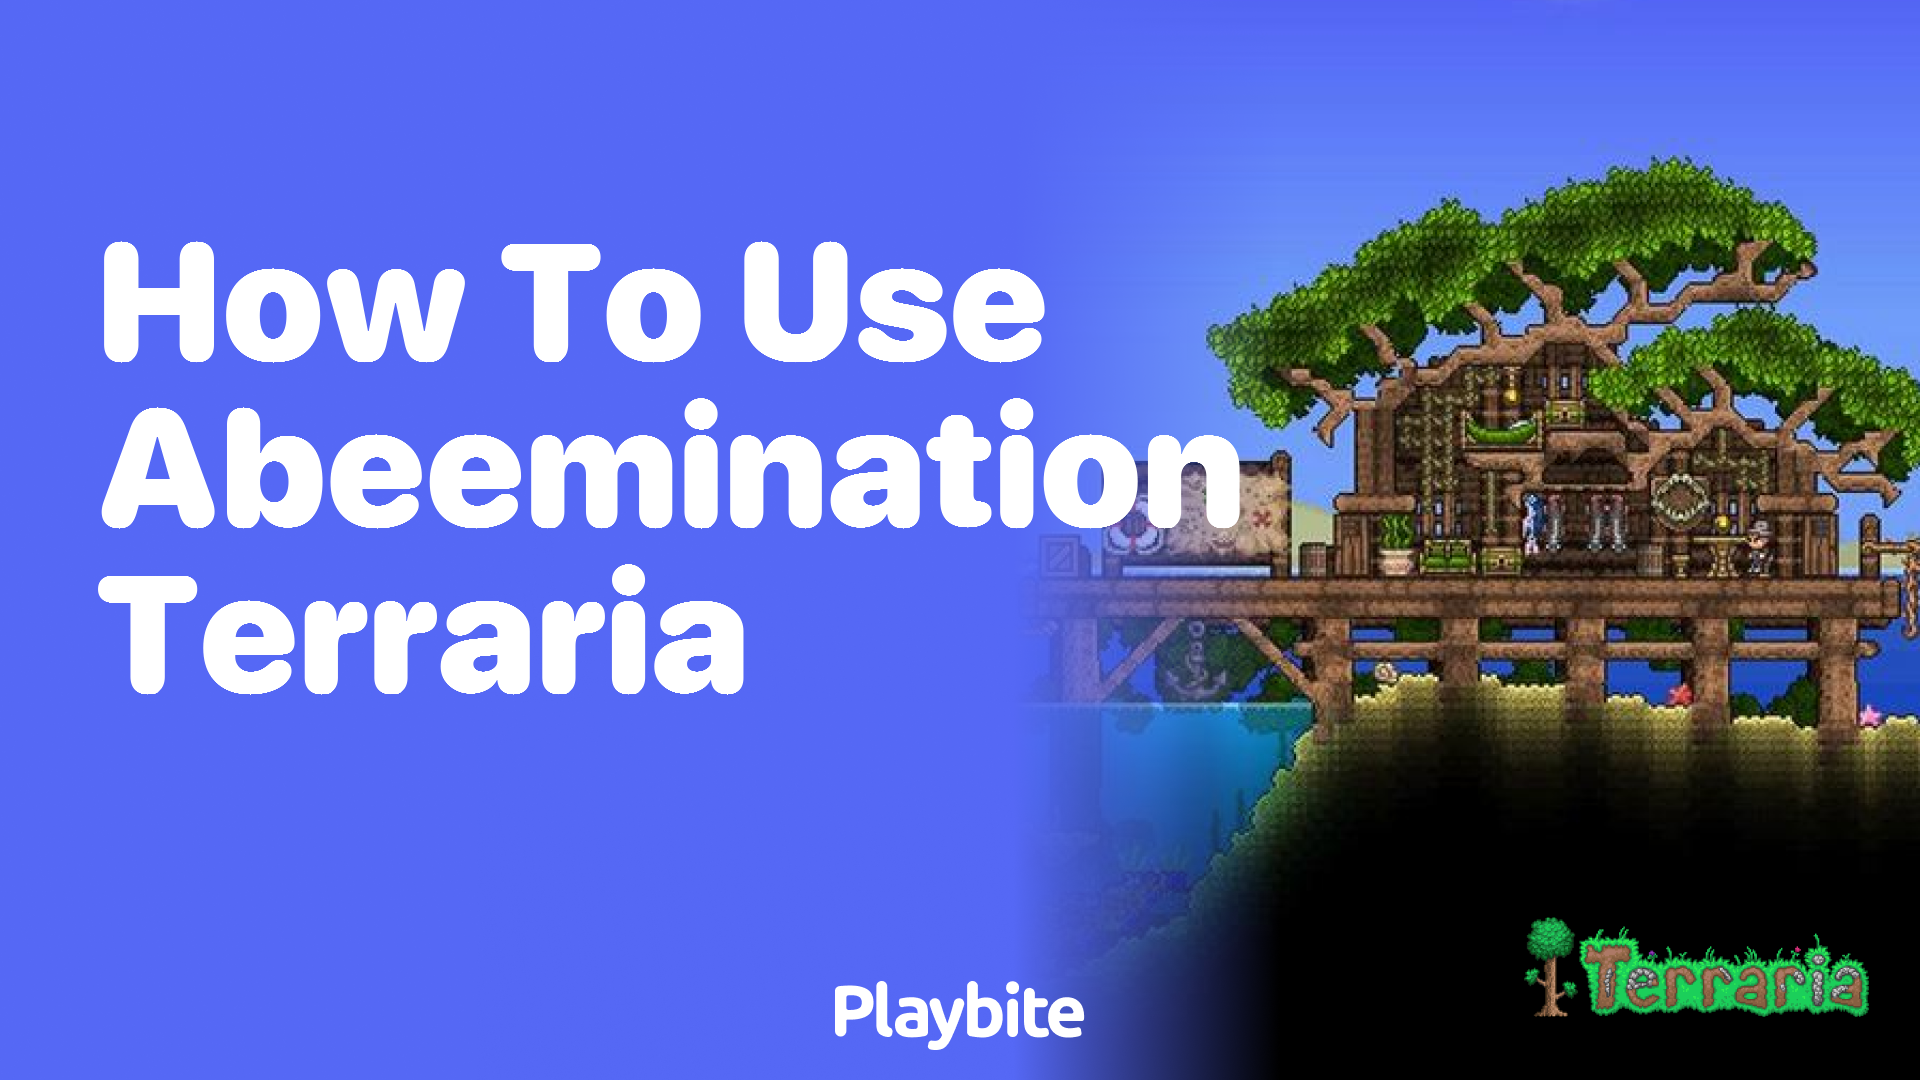 How to Use Abeemination in Terraria